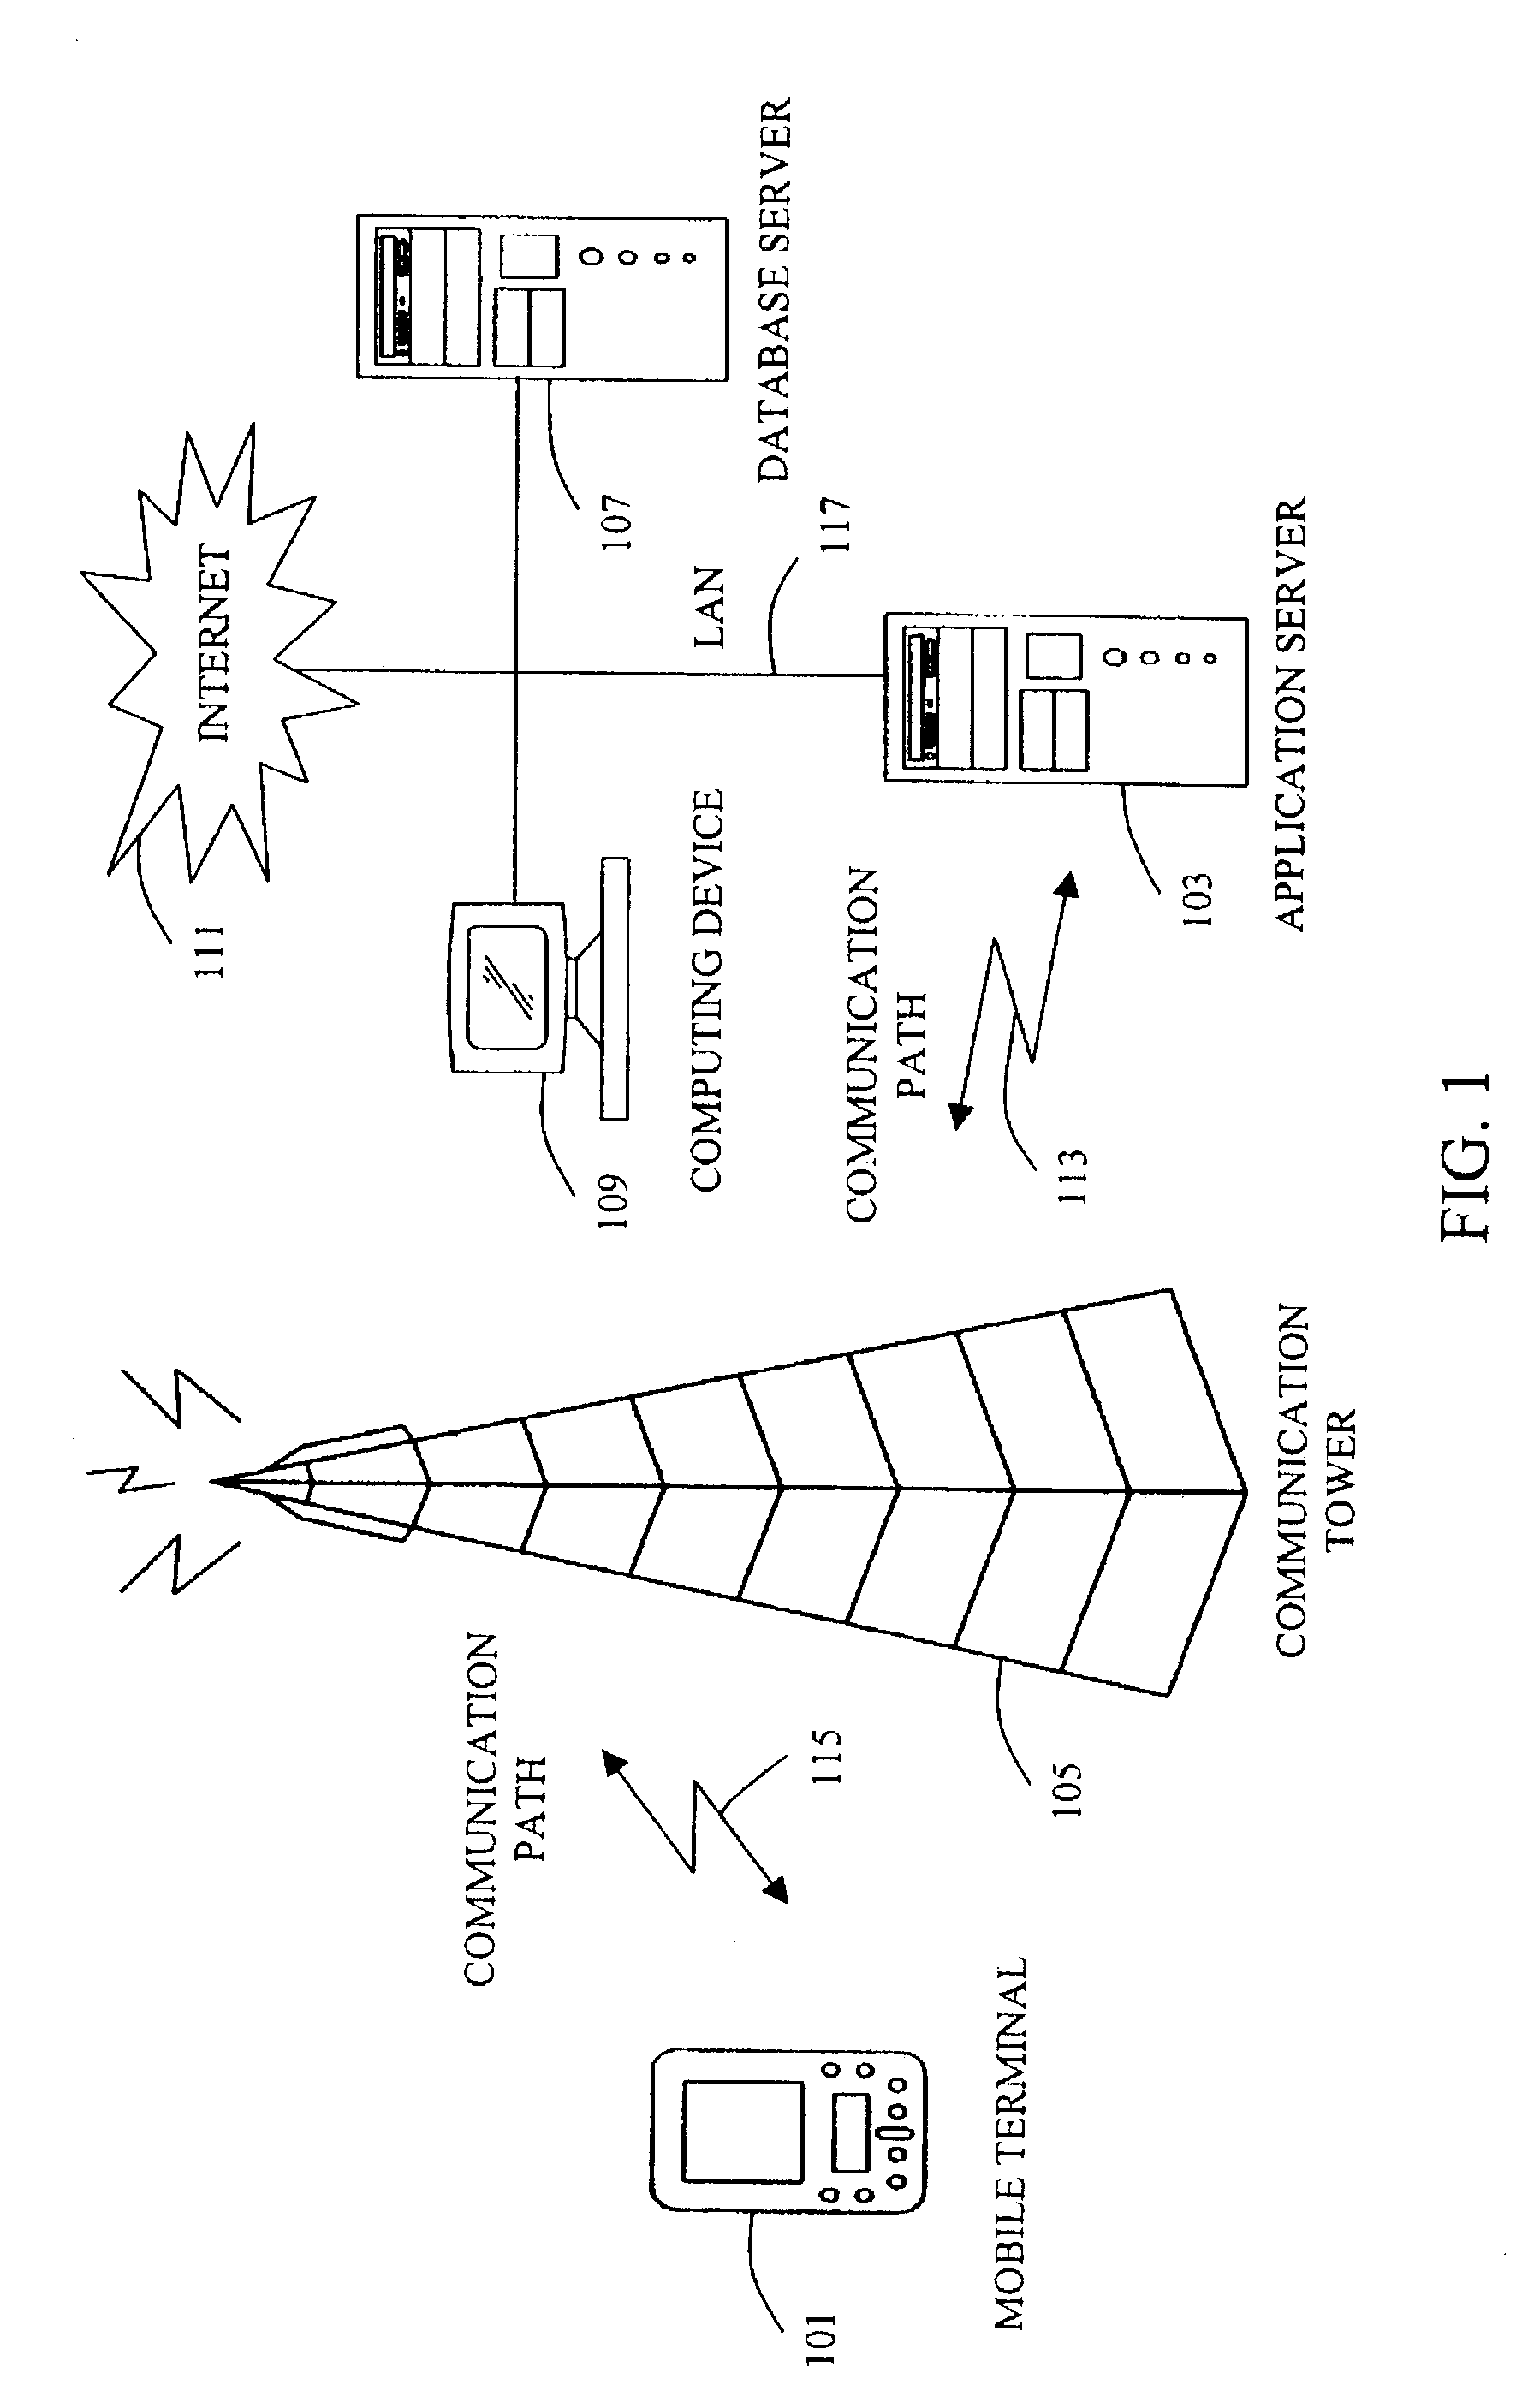 System and method for synchronizing data of wireless devices